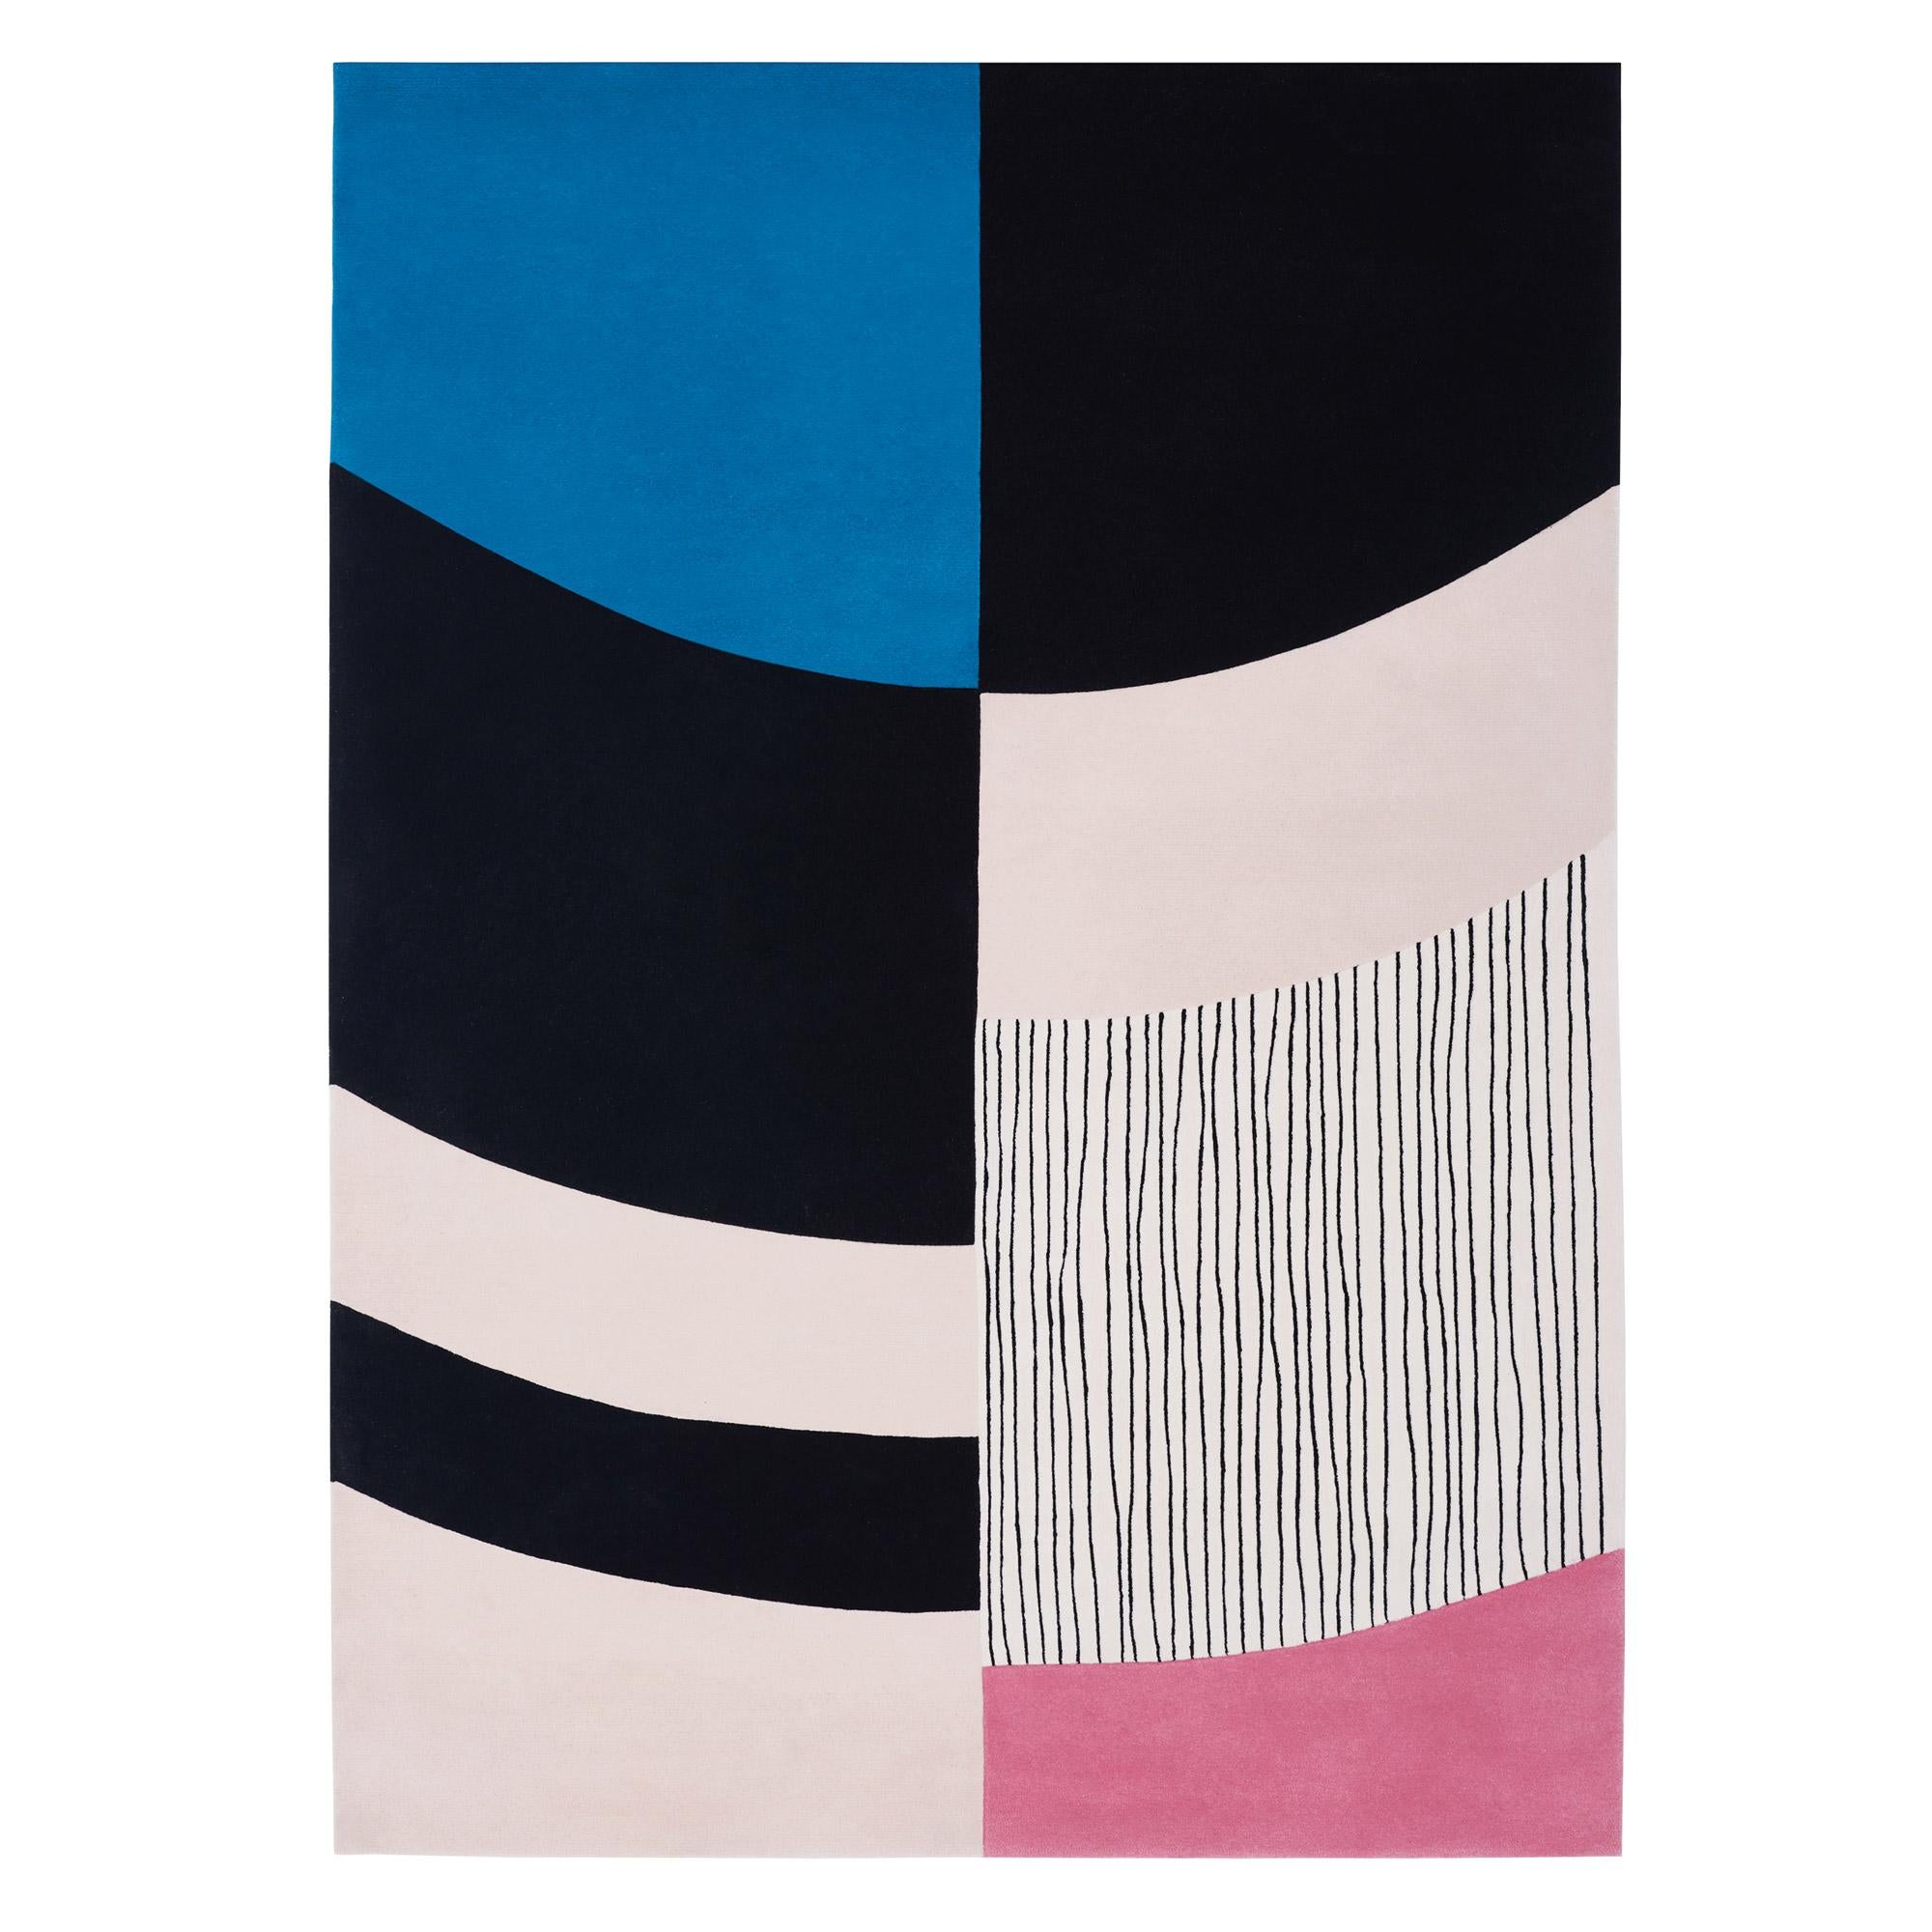 Seoul By Day N°2 rug by Thomas Dariel 
Dimensions: D 170 x W 240 cm 
Materials: New Zealand Wool and Viscose. 
Also available in other colors, designs, and dimensions.


The South Korean capital is known for its twenty-five bridges spanning